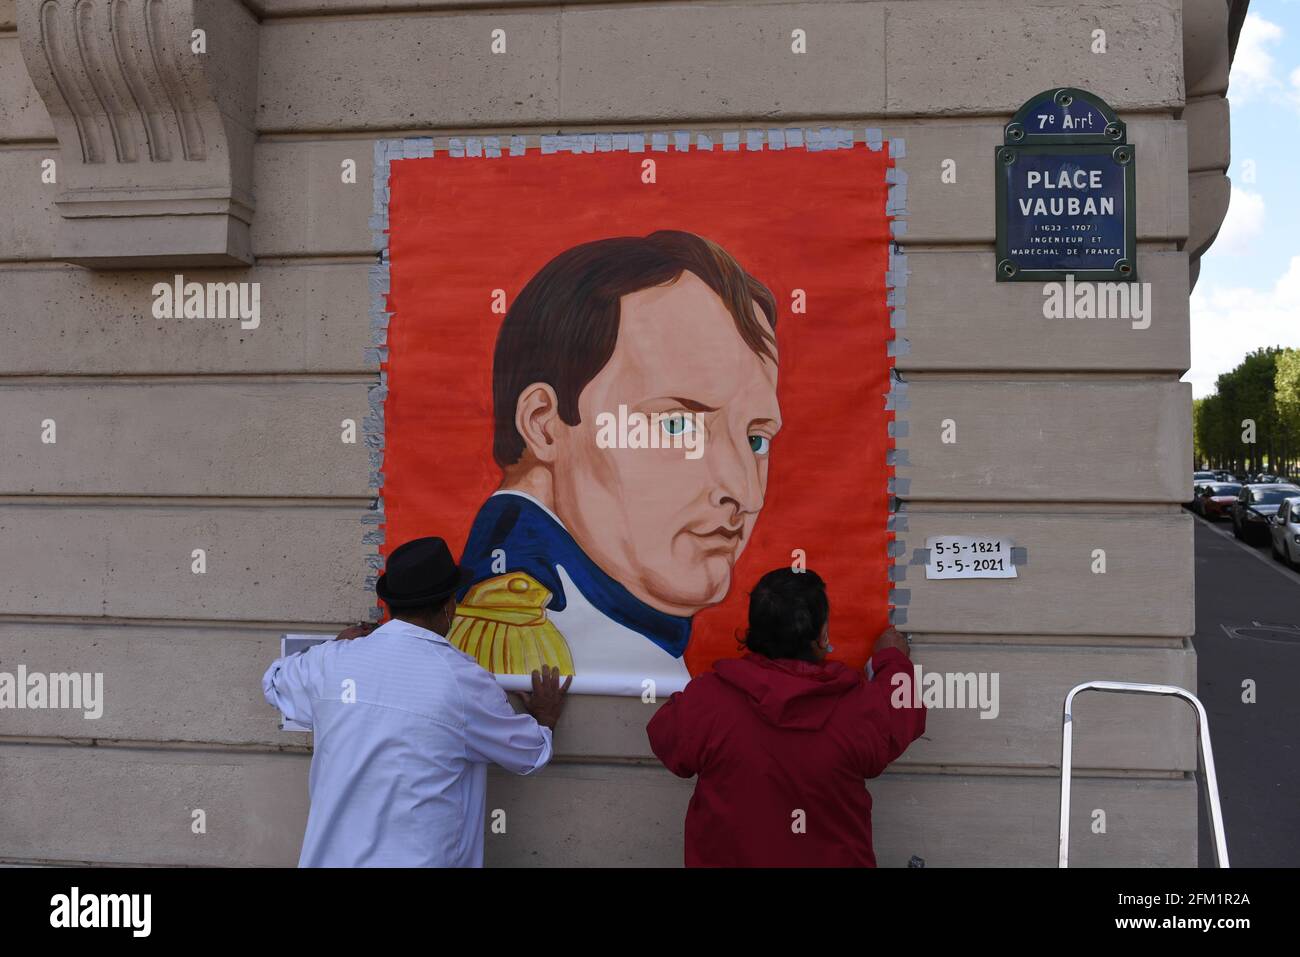 *** STRICTLY NO SALES TO FRENCH MEDIA OR PUBLISHERS - RIGHTS RESERVED ***May 05, 2021 - Paris, France: An artist unrolls a painting depicting French emperor Napoleon Bonaparte in front of the Invalides church, where the emperor's tomb is located, to mark the bicentenary of his death. Stock Photo